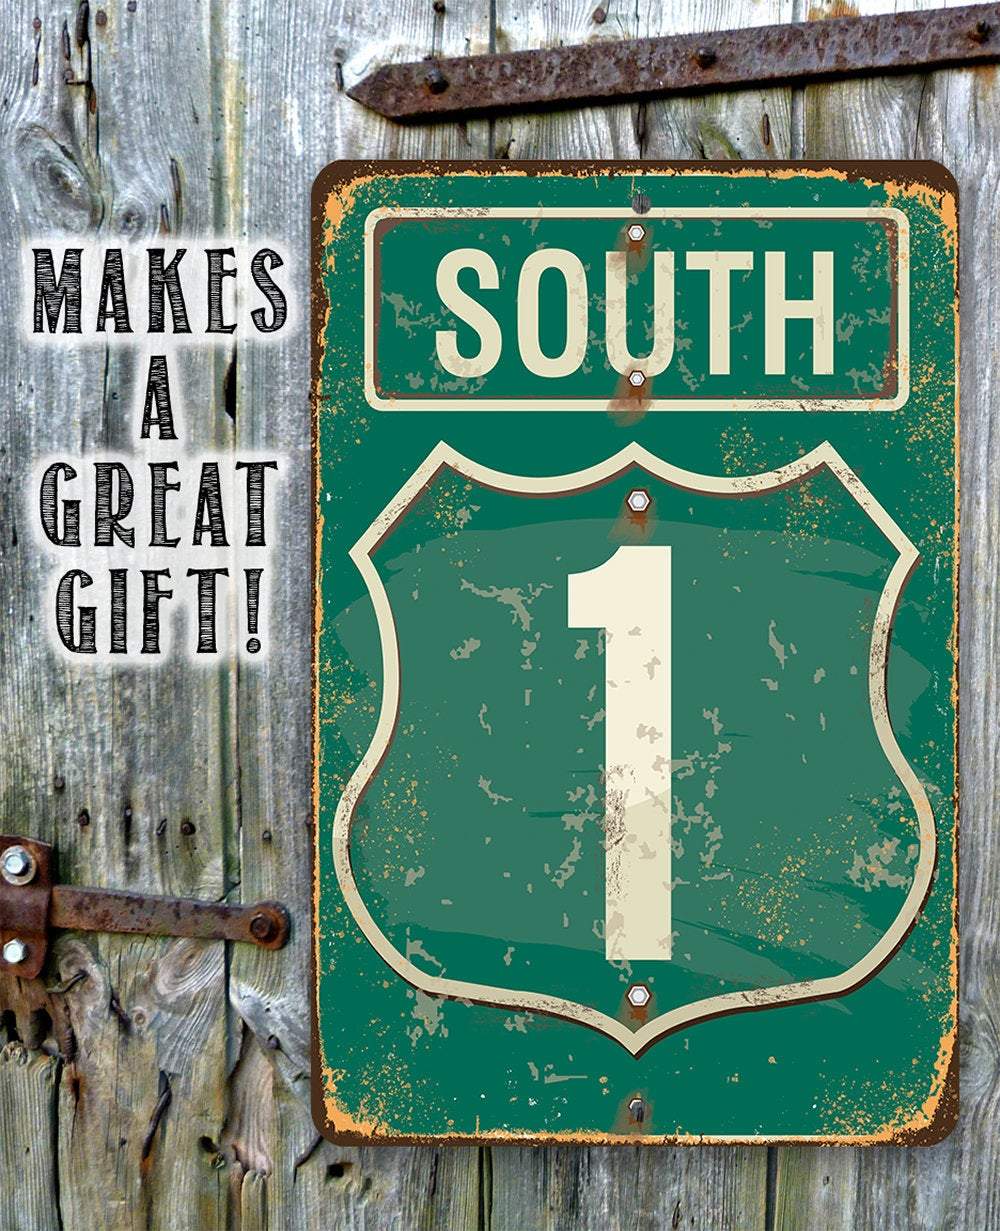 South Highway - Metal Sign | Lone Star Art.